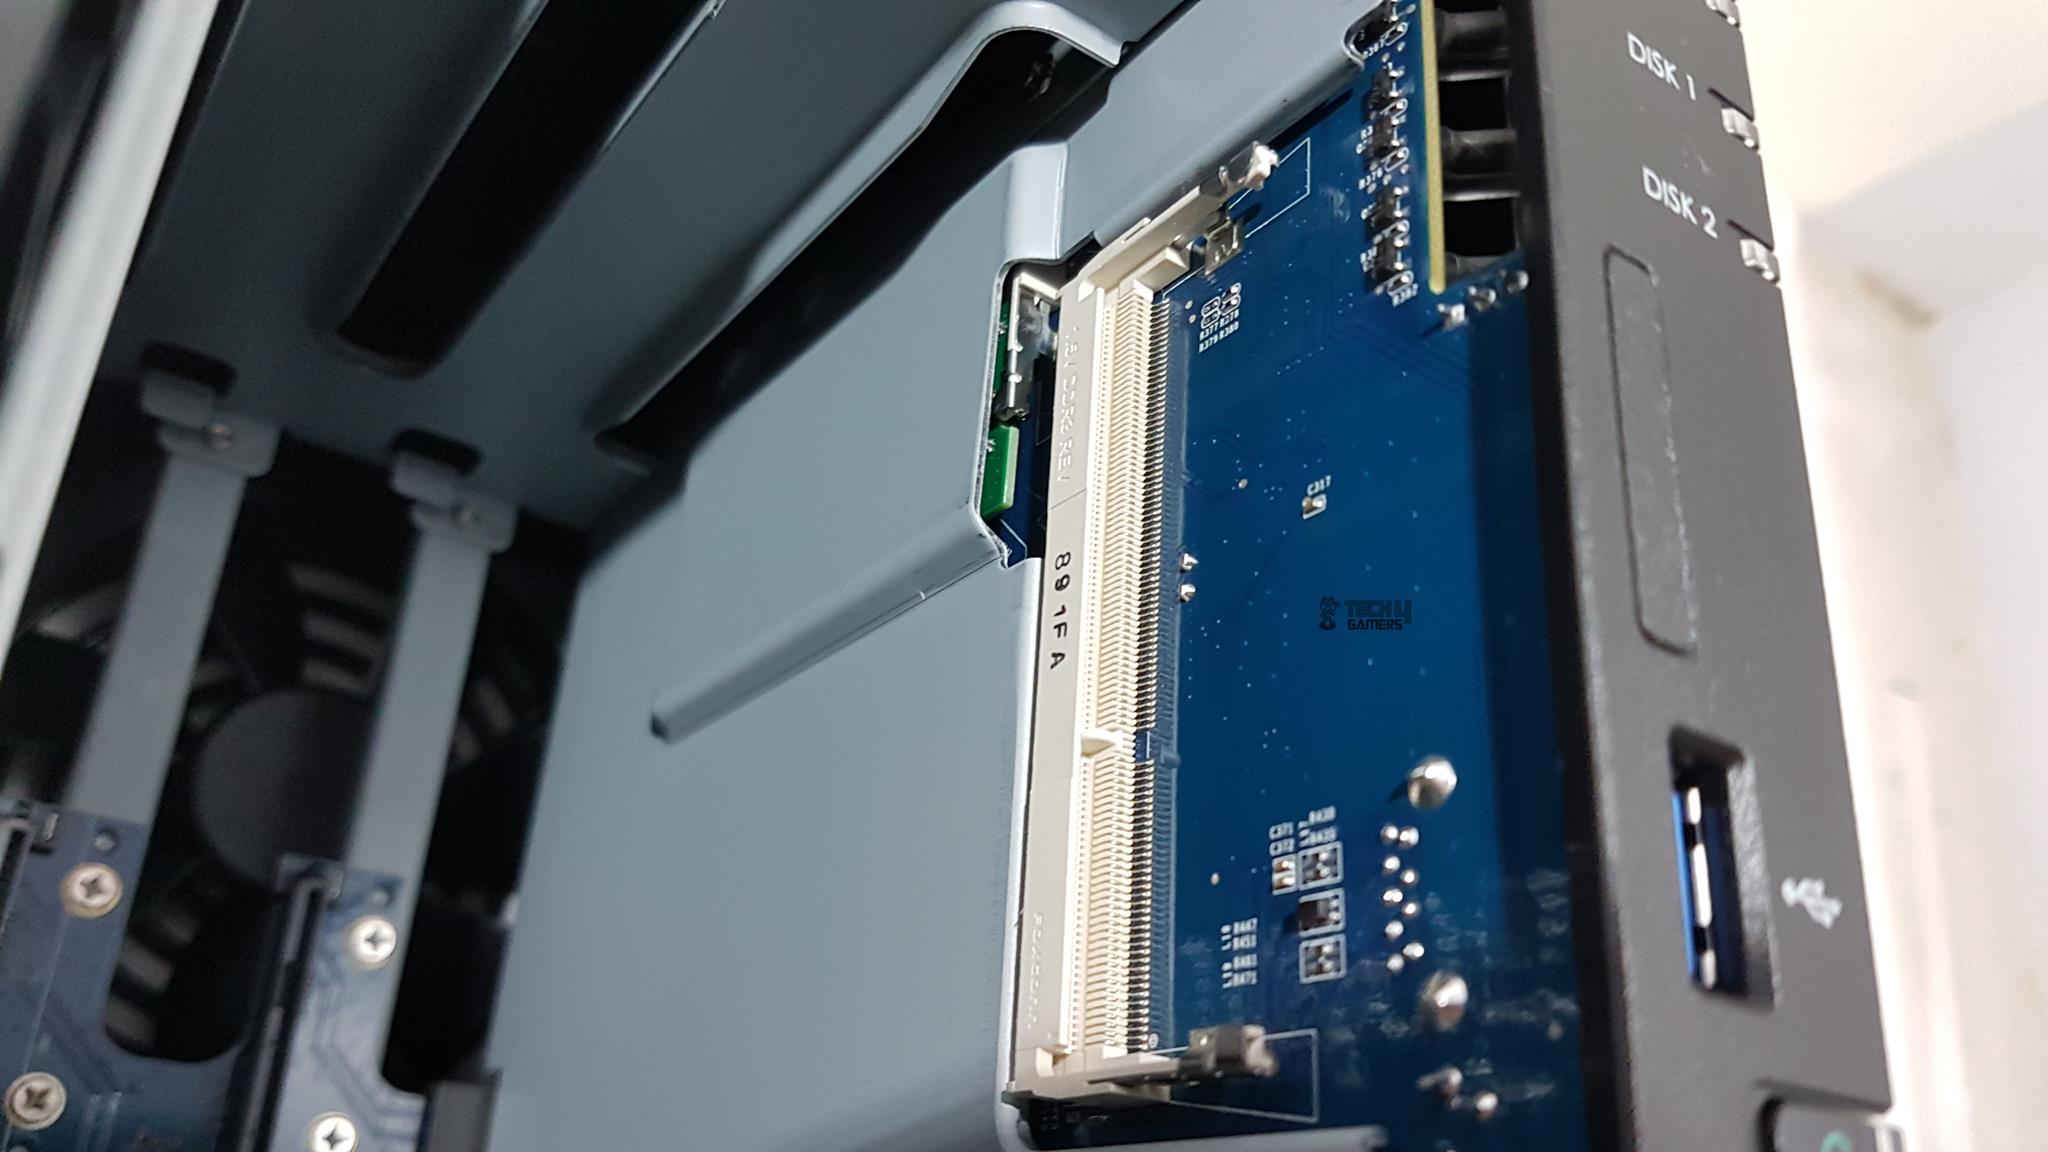 Synology ds218 vs ds218+ PCB of the NAS box